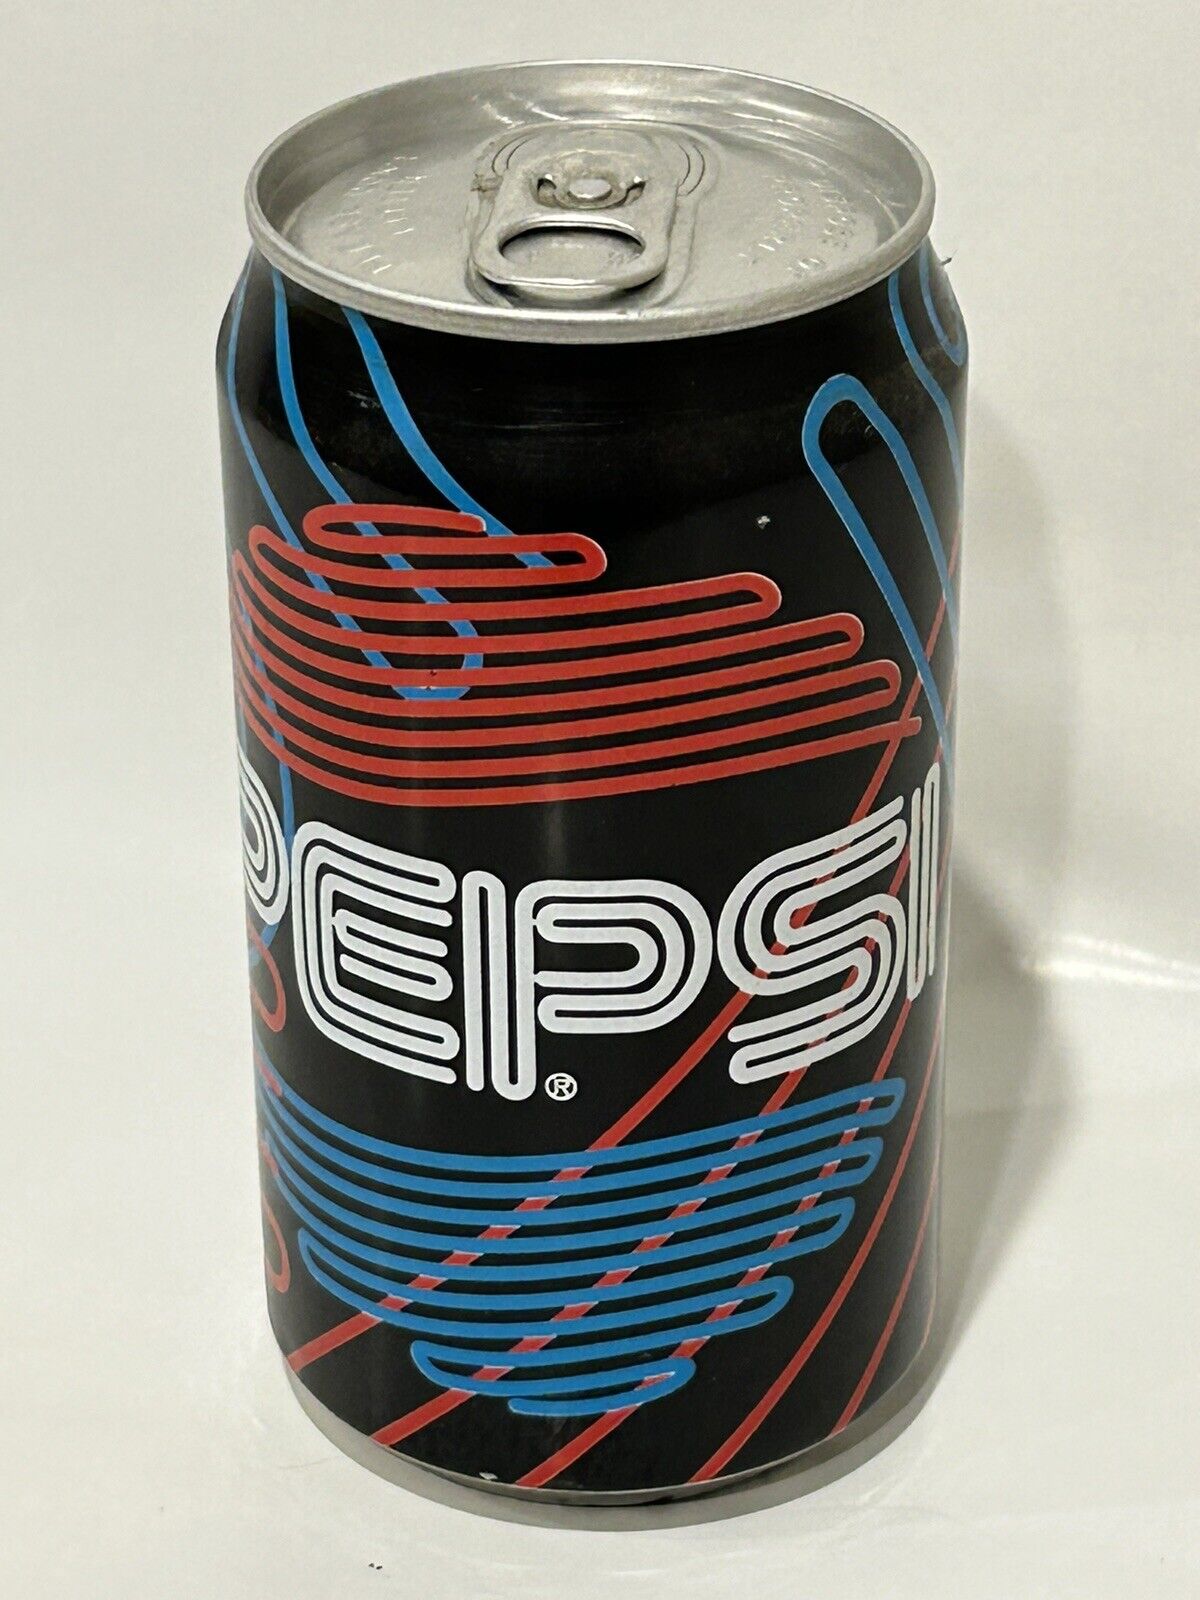 Vintage 1990 12oz. Pepsi Neon “Sex” Can PEPSI COOL CANS Full Unopened